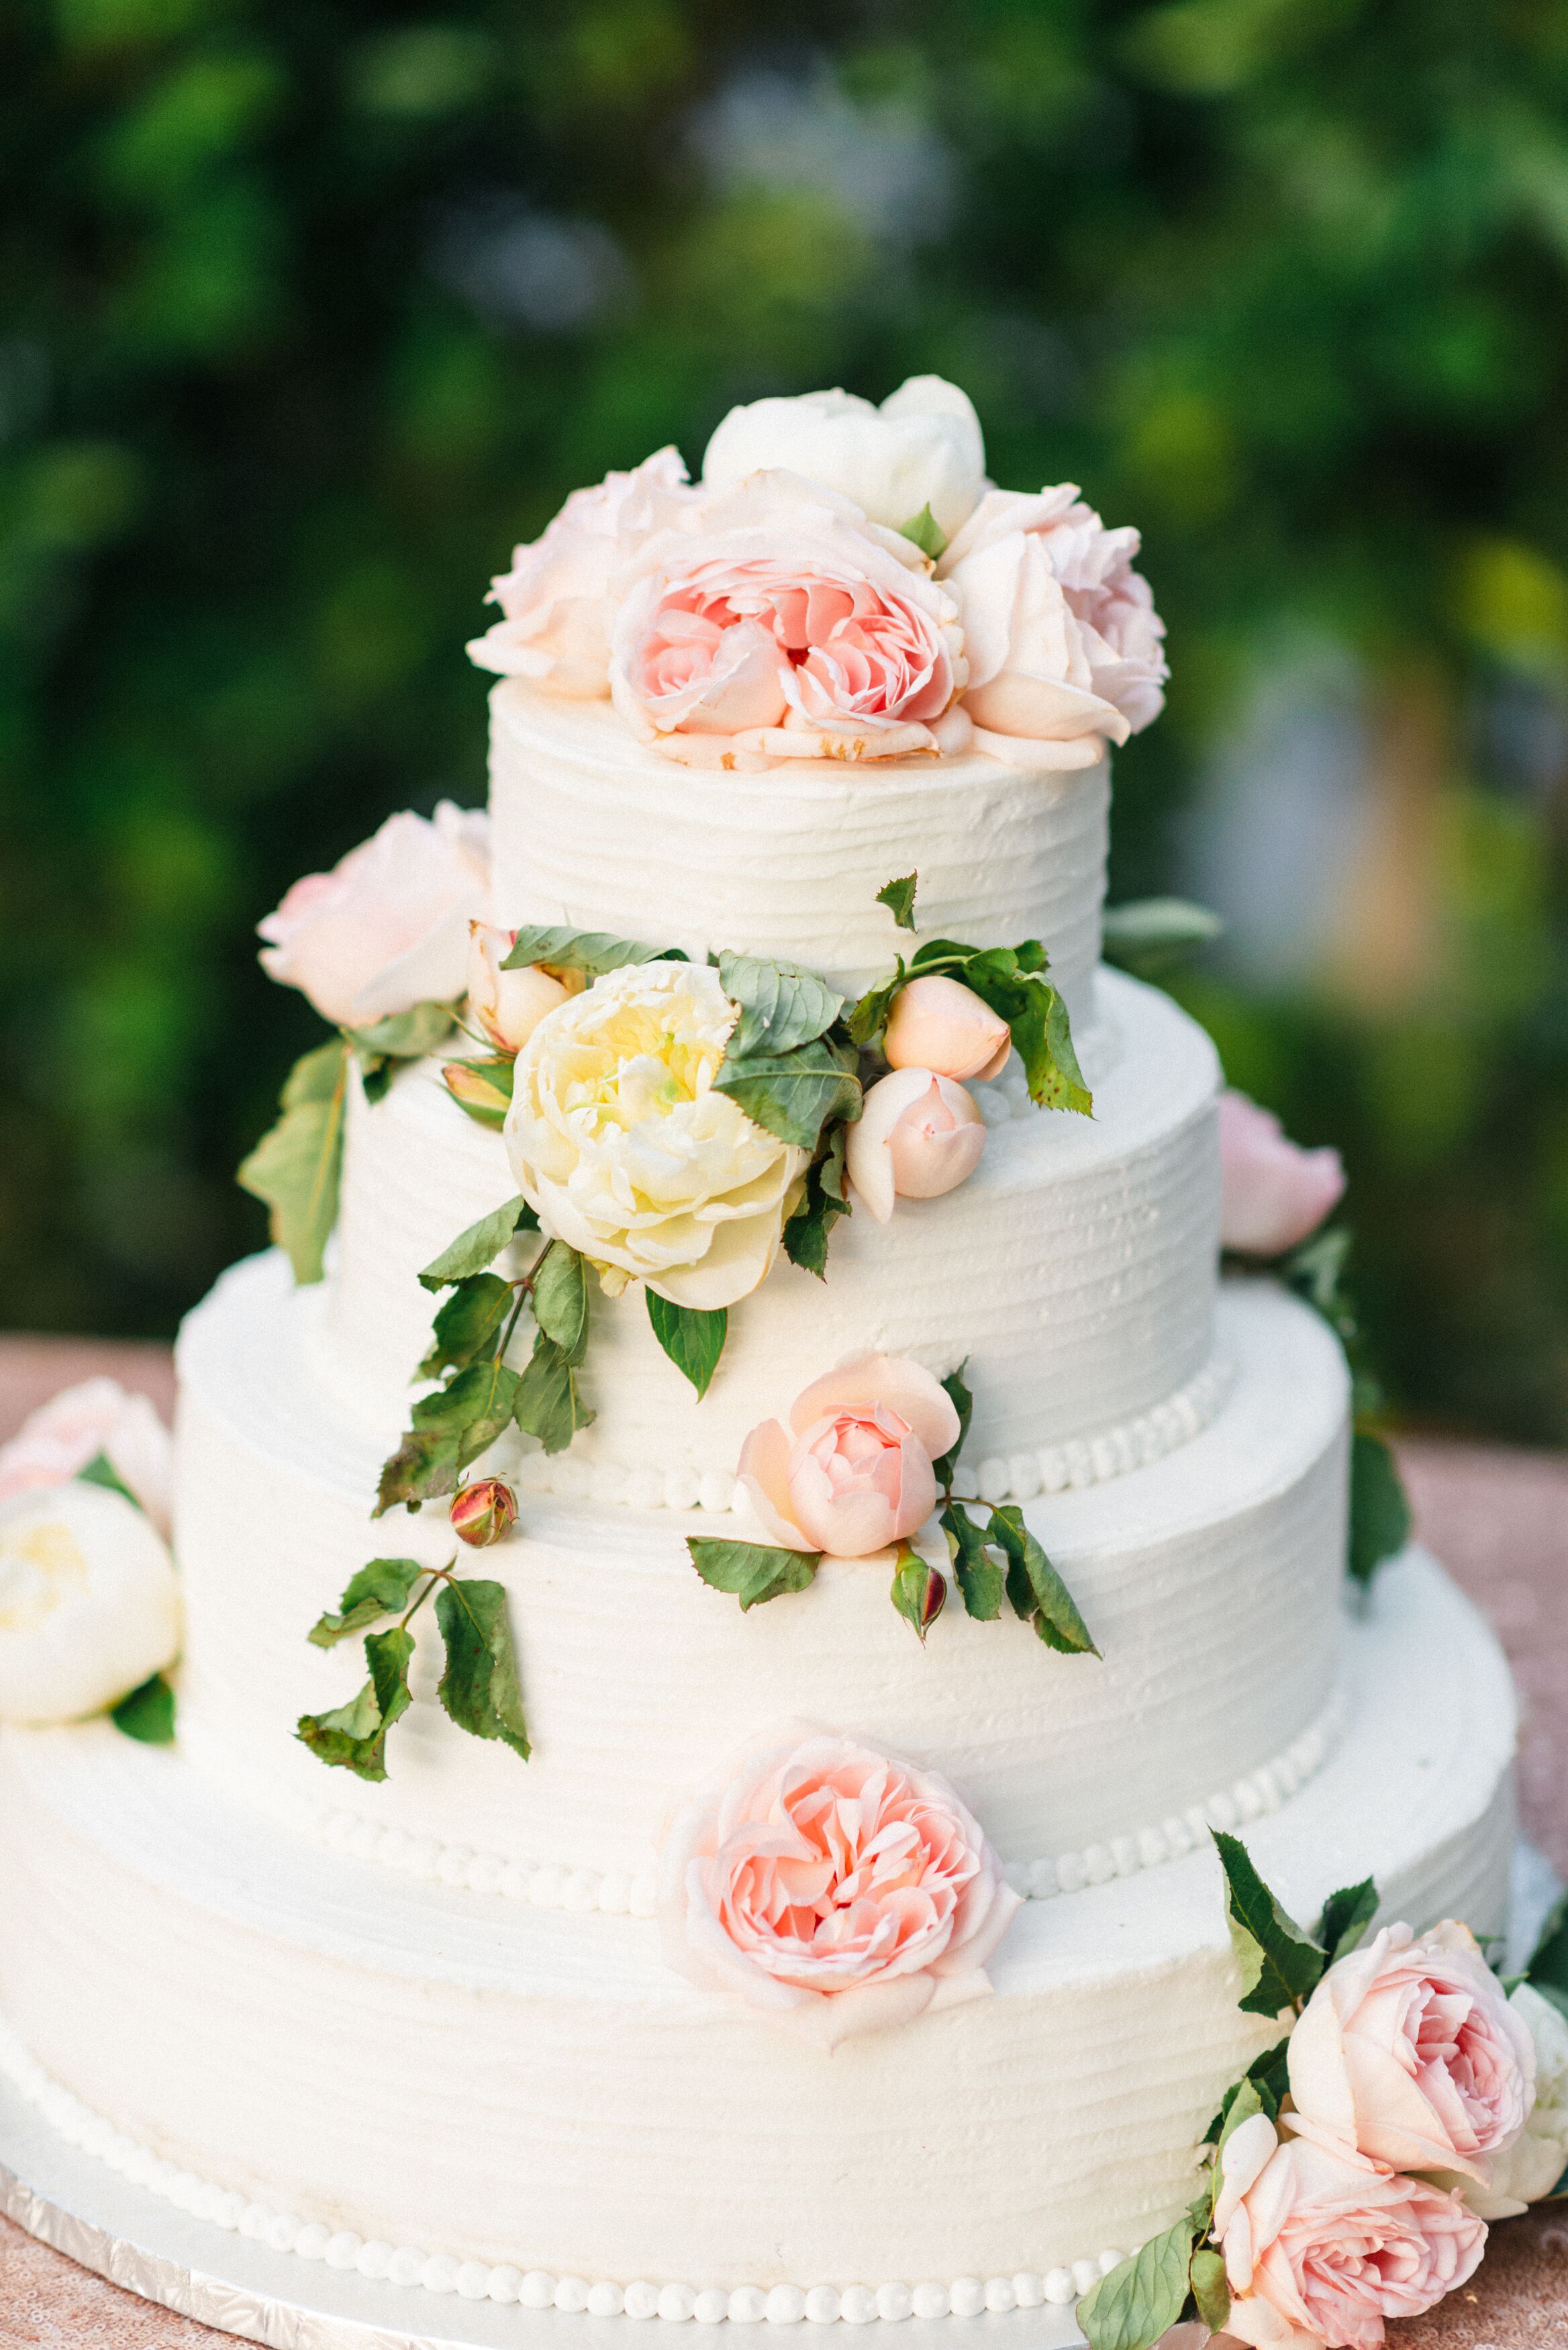 White Wedding Cake With Pink Peonies and Roses